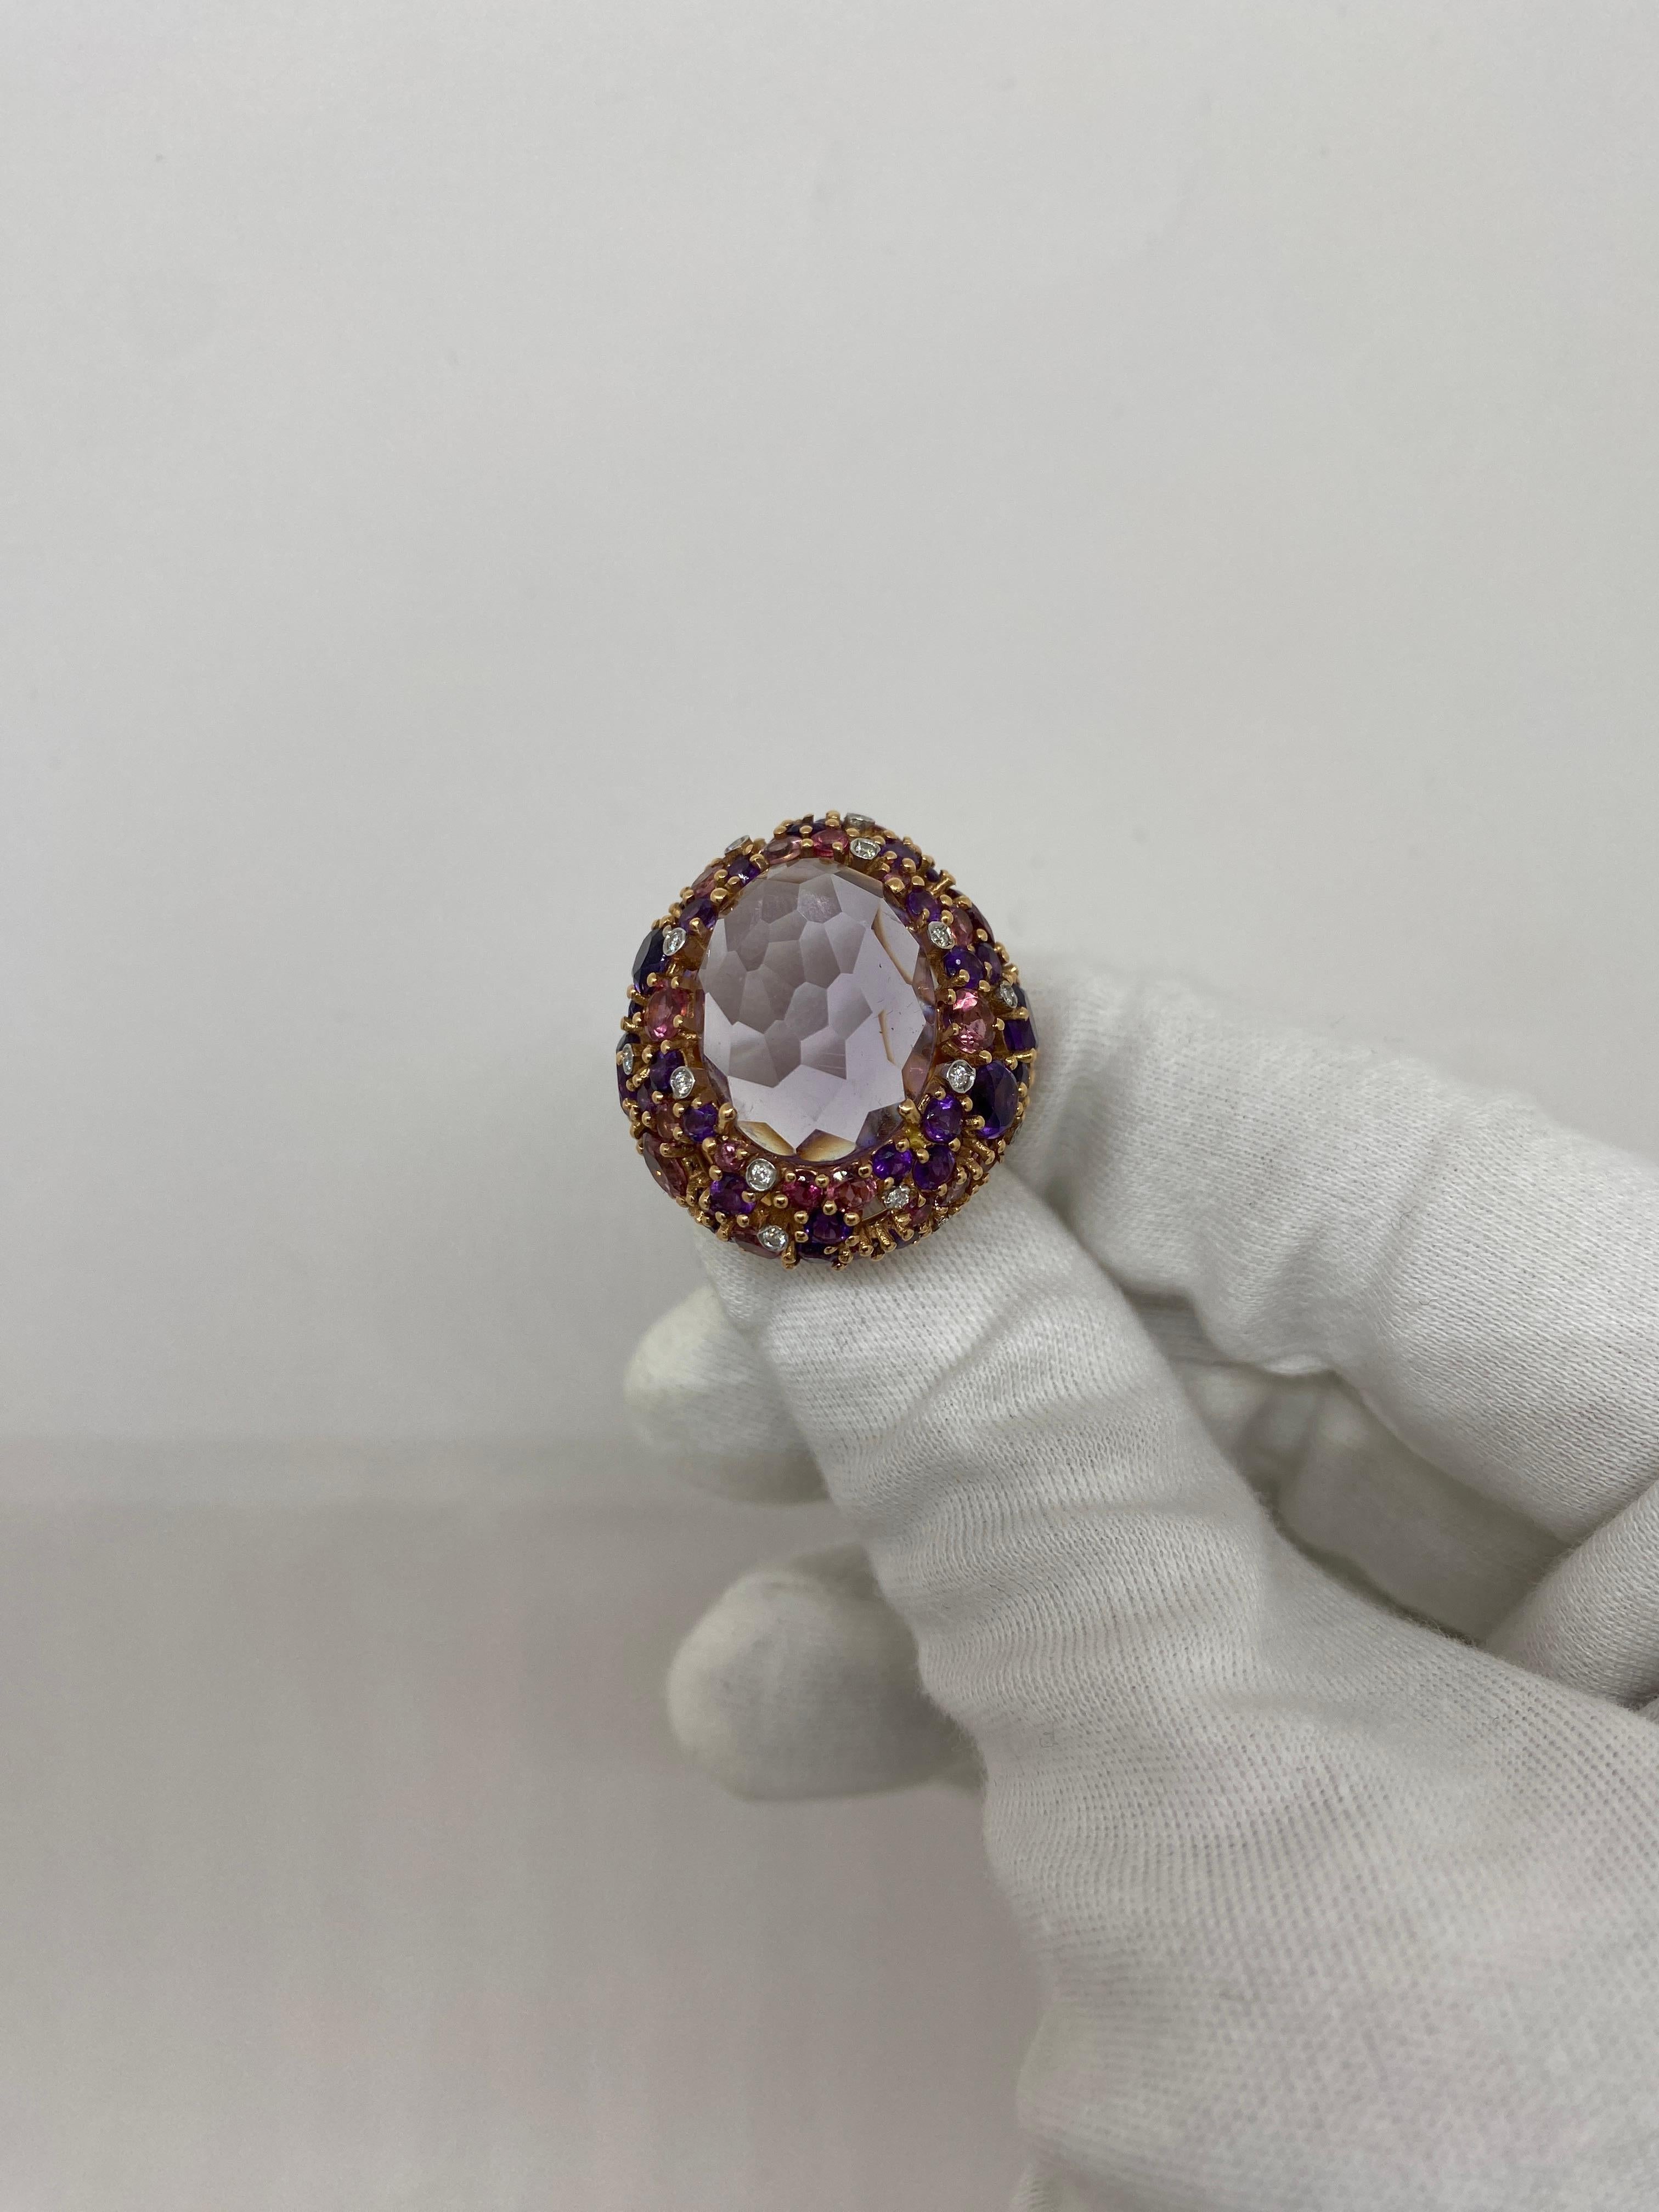 18 kt rose gold ring with central oval-cut amethyst surrounded by pink sapphires, amethysts and white natural round-cut diamonds

Welcome to our jewelry collection, where every piece tells a story of timeless elegance and unparalleled craftsmanship.